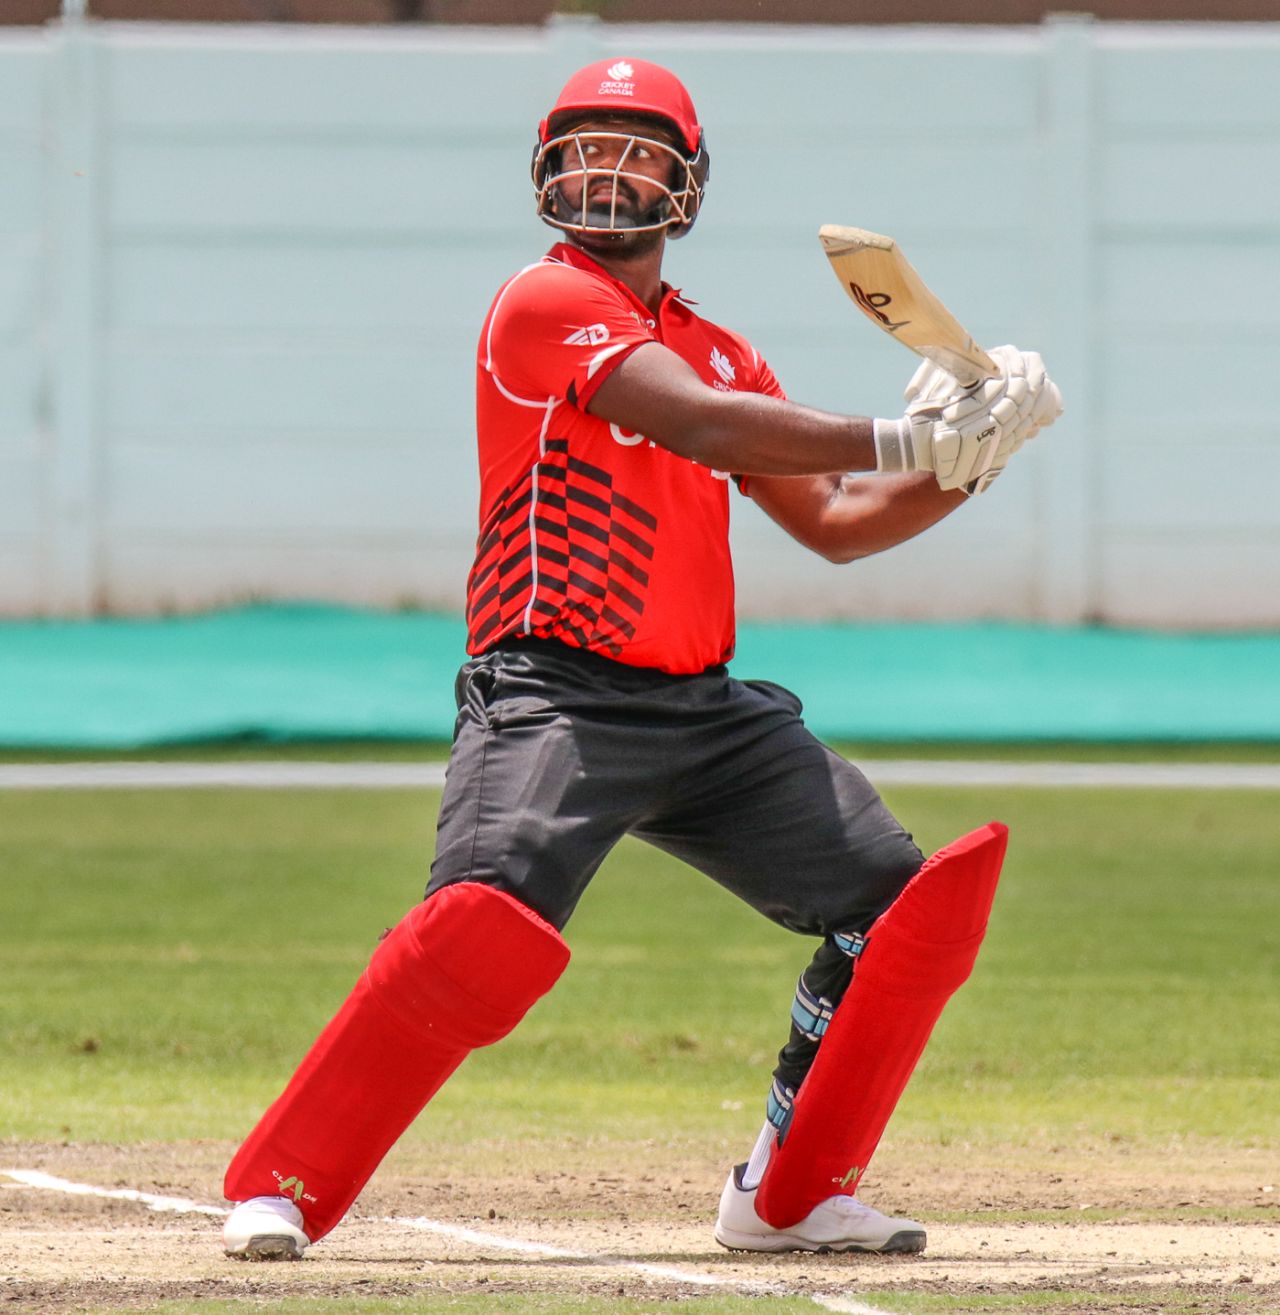 Srimantha Wijeyeratne demonstrated inventive strokeplay throughout his innings, Canada v Nepal, ICC World Cricket League Division Two, Windhoek, February 14, 2018